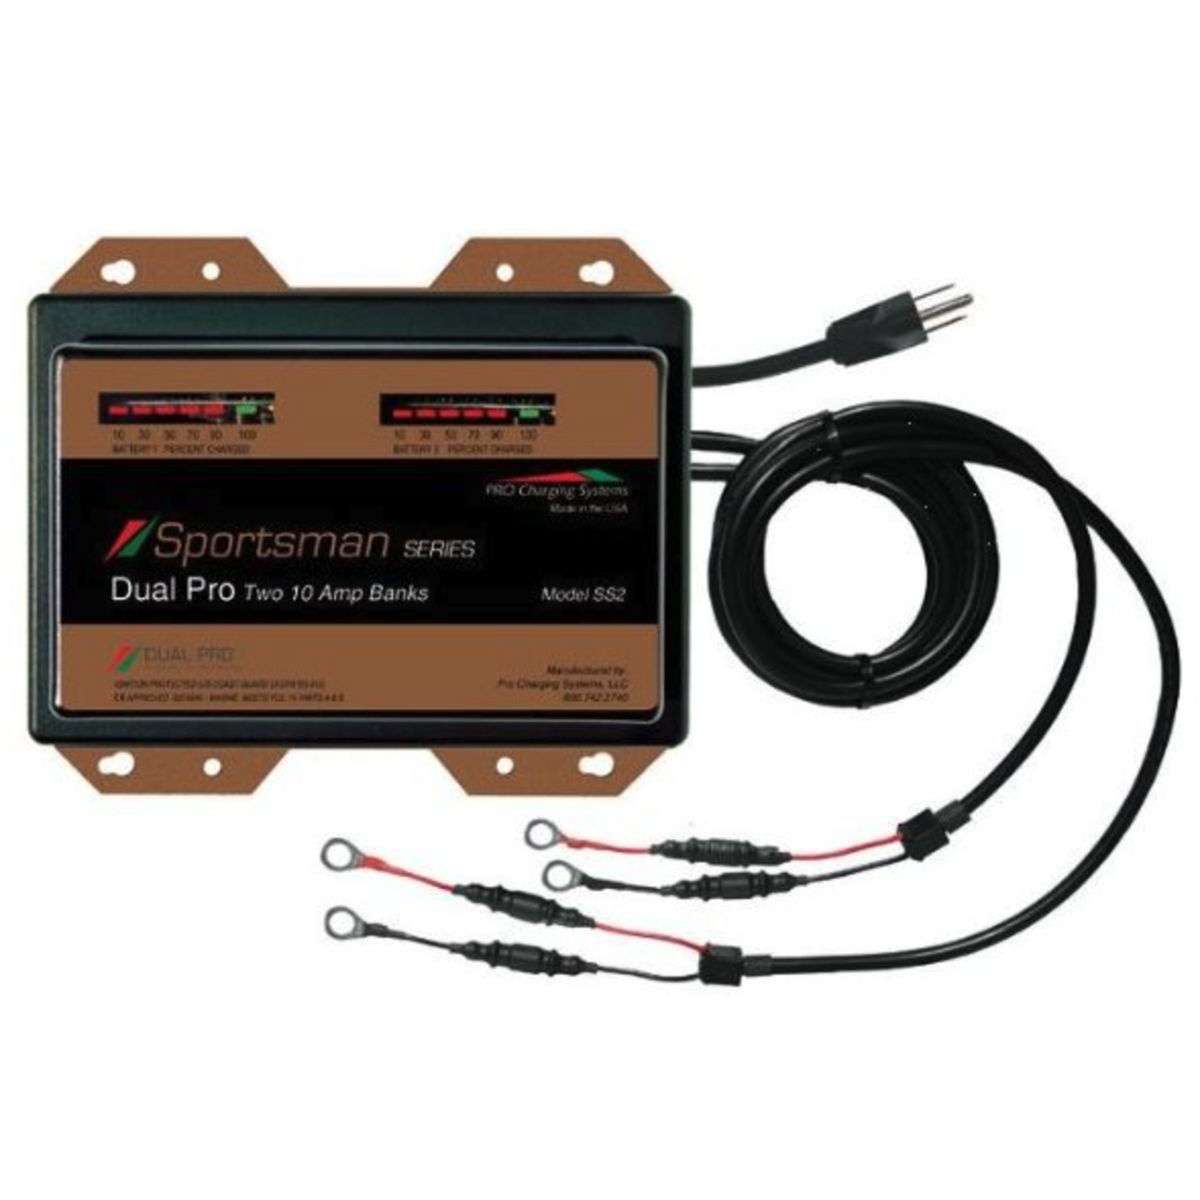 Dual Pro Sportsman Series Battery Charger - Two Bank Series, 20 Amp